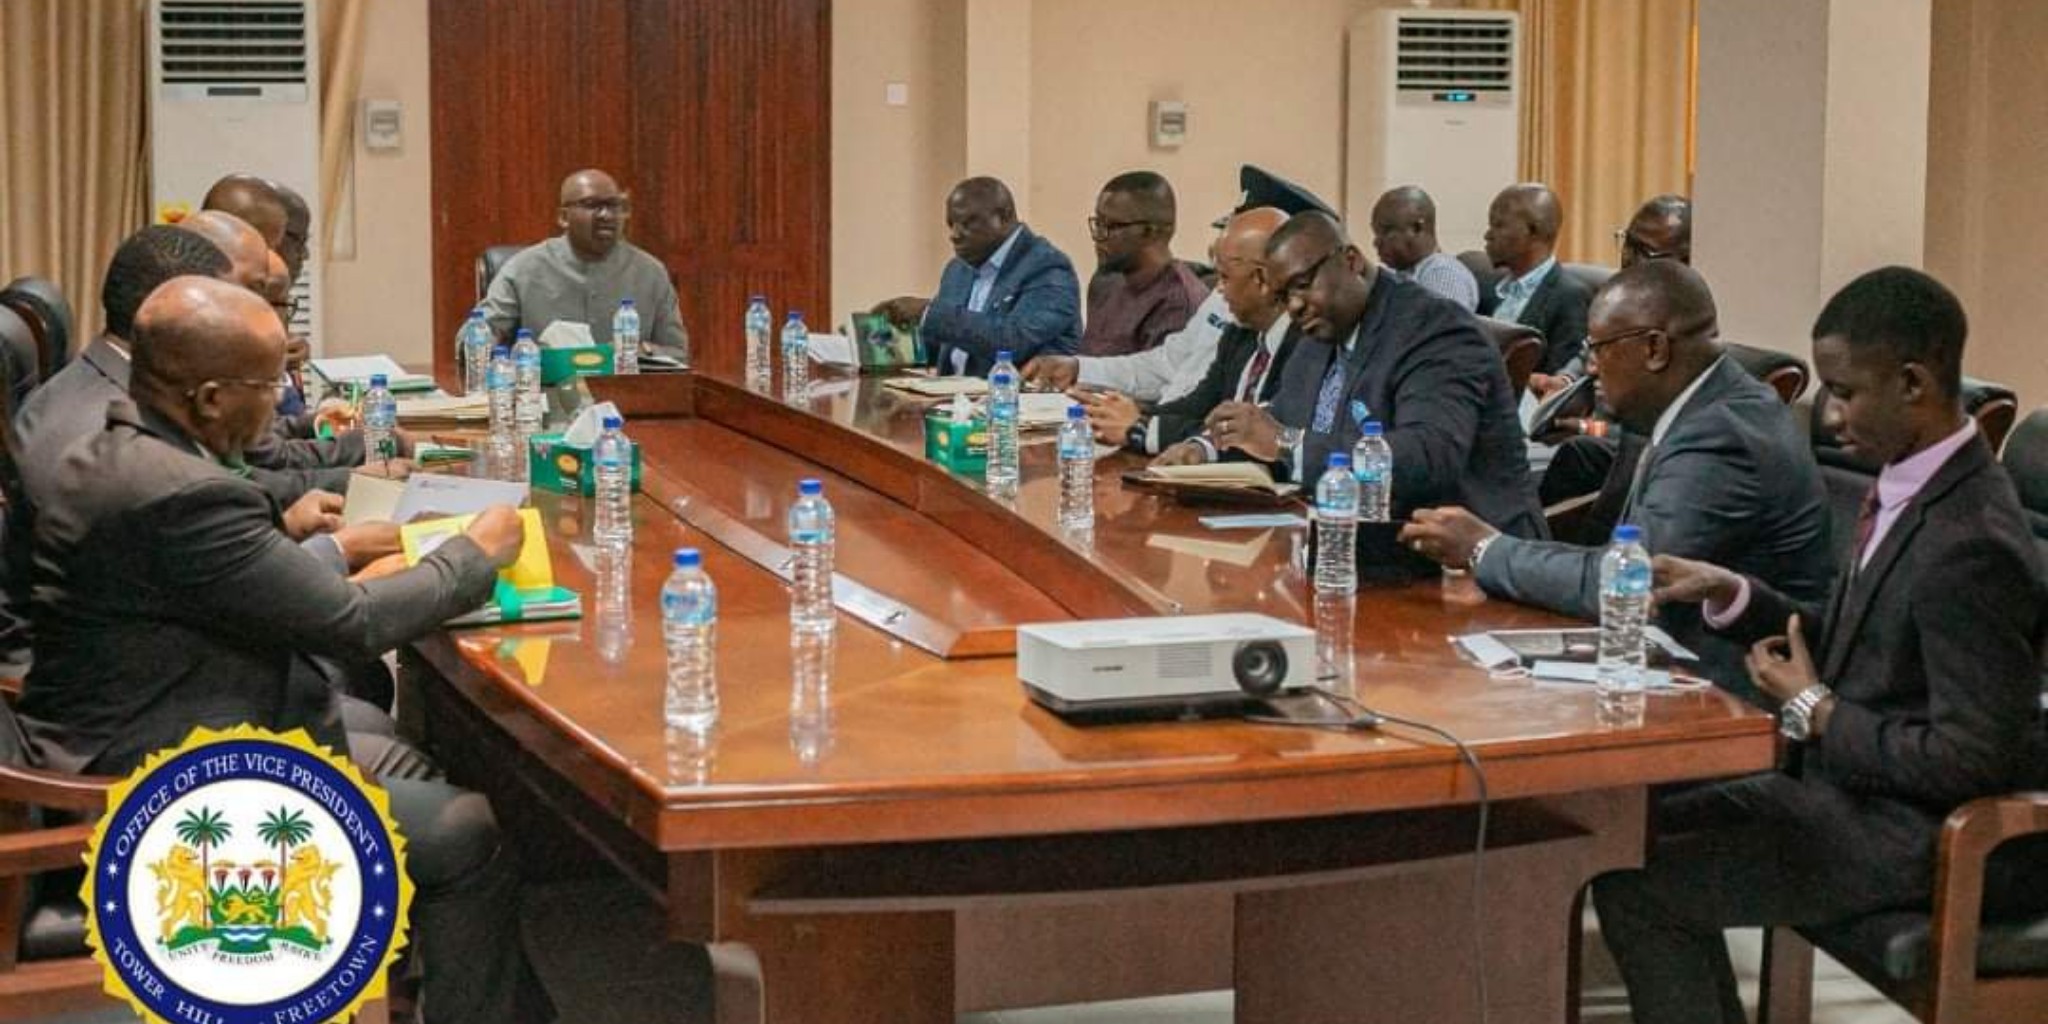 Vice President Juldeh Jalloh Engages Key Stakeholders in The Petroleum Sector